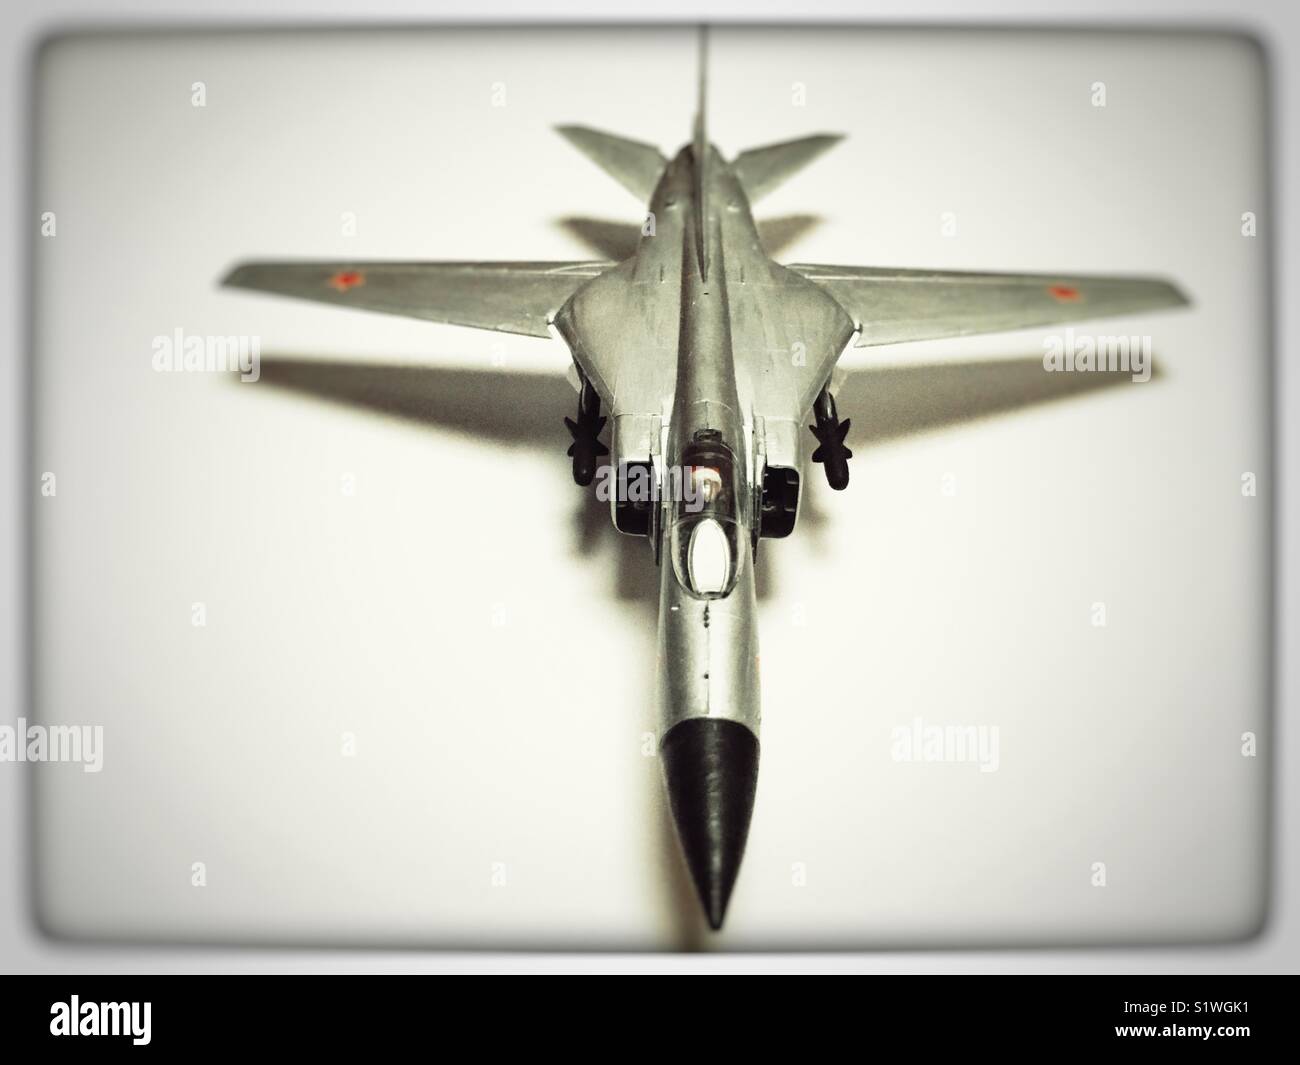 Cold War fighter bomber model aircraft Stock Photo